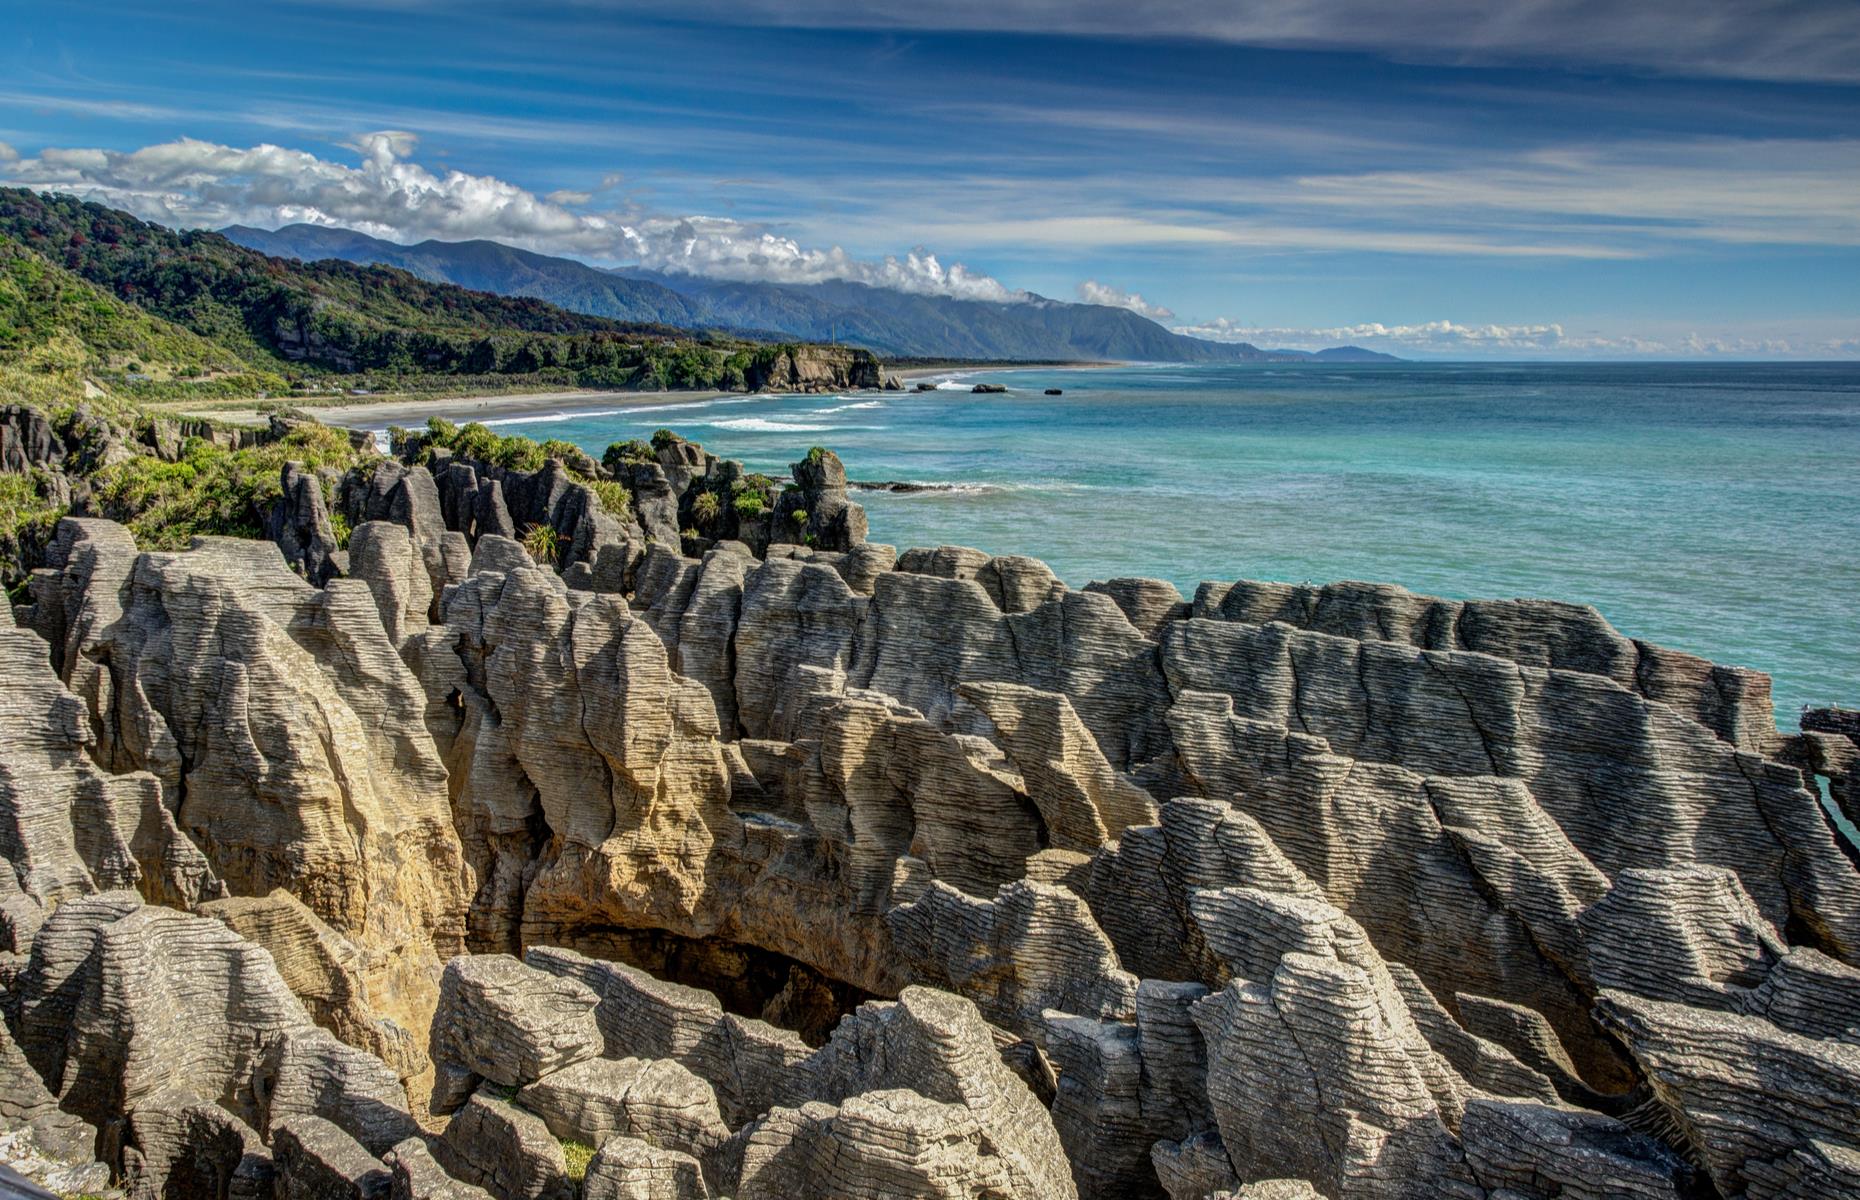 Around 30 million years in the making, the Pancake Rocks at Dolomite Point near Punakaiki are a heavily eroded limestone area with vertical blowholes (at their most impressive at high tide). The Pancake Rocks track can take around 40 minutes to walk, but you’re sure to be a lot longer as you stop to take photos of this incredible natural wonder.